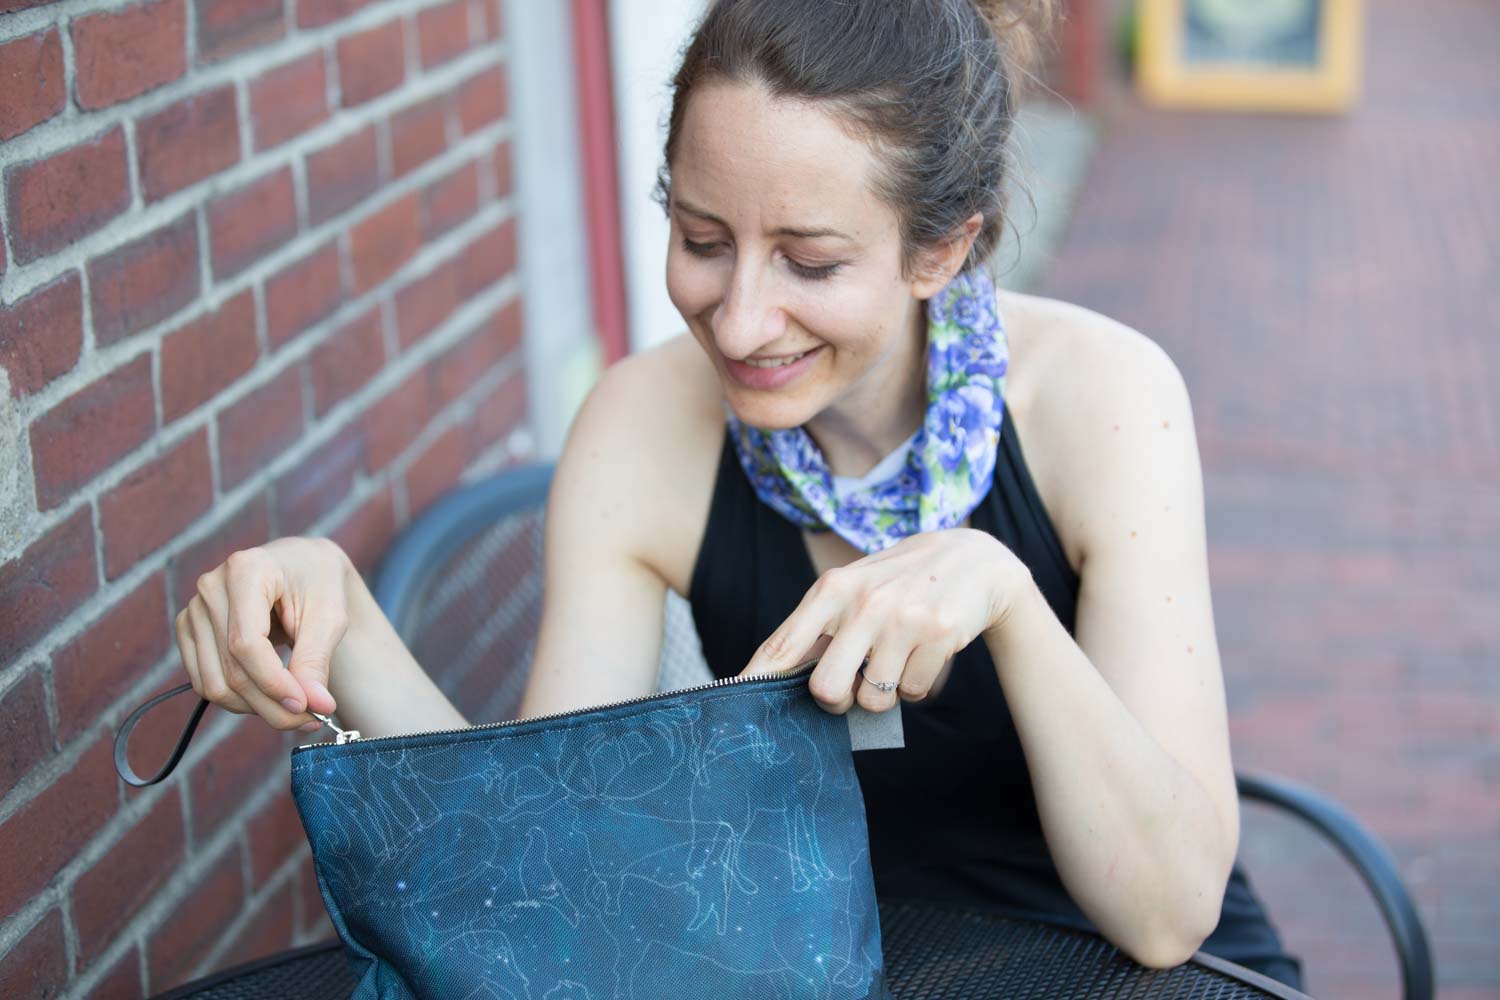 Uncommon Constellations Clutch Carryall